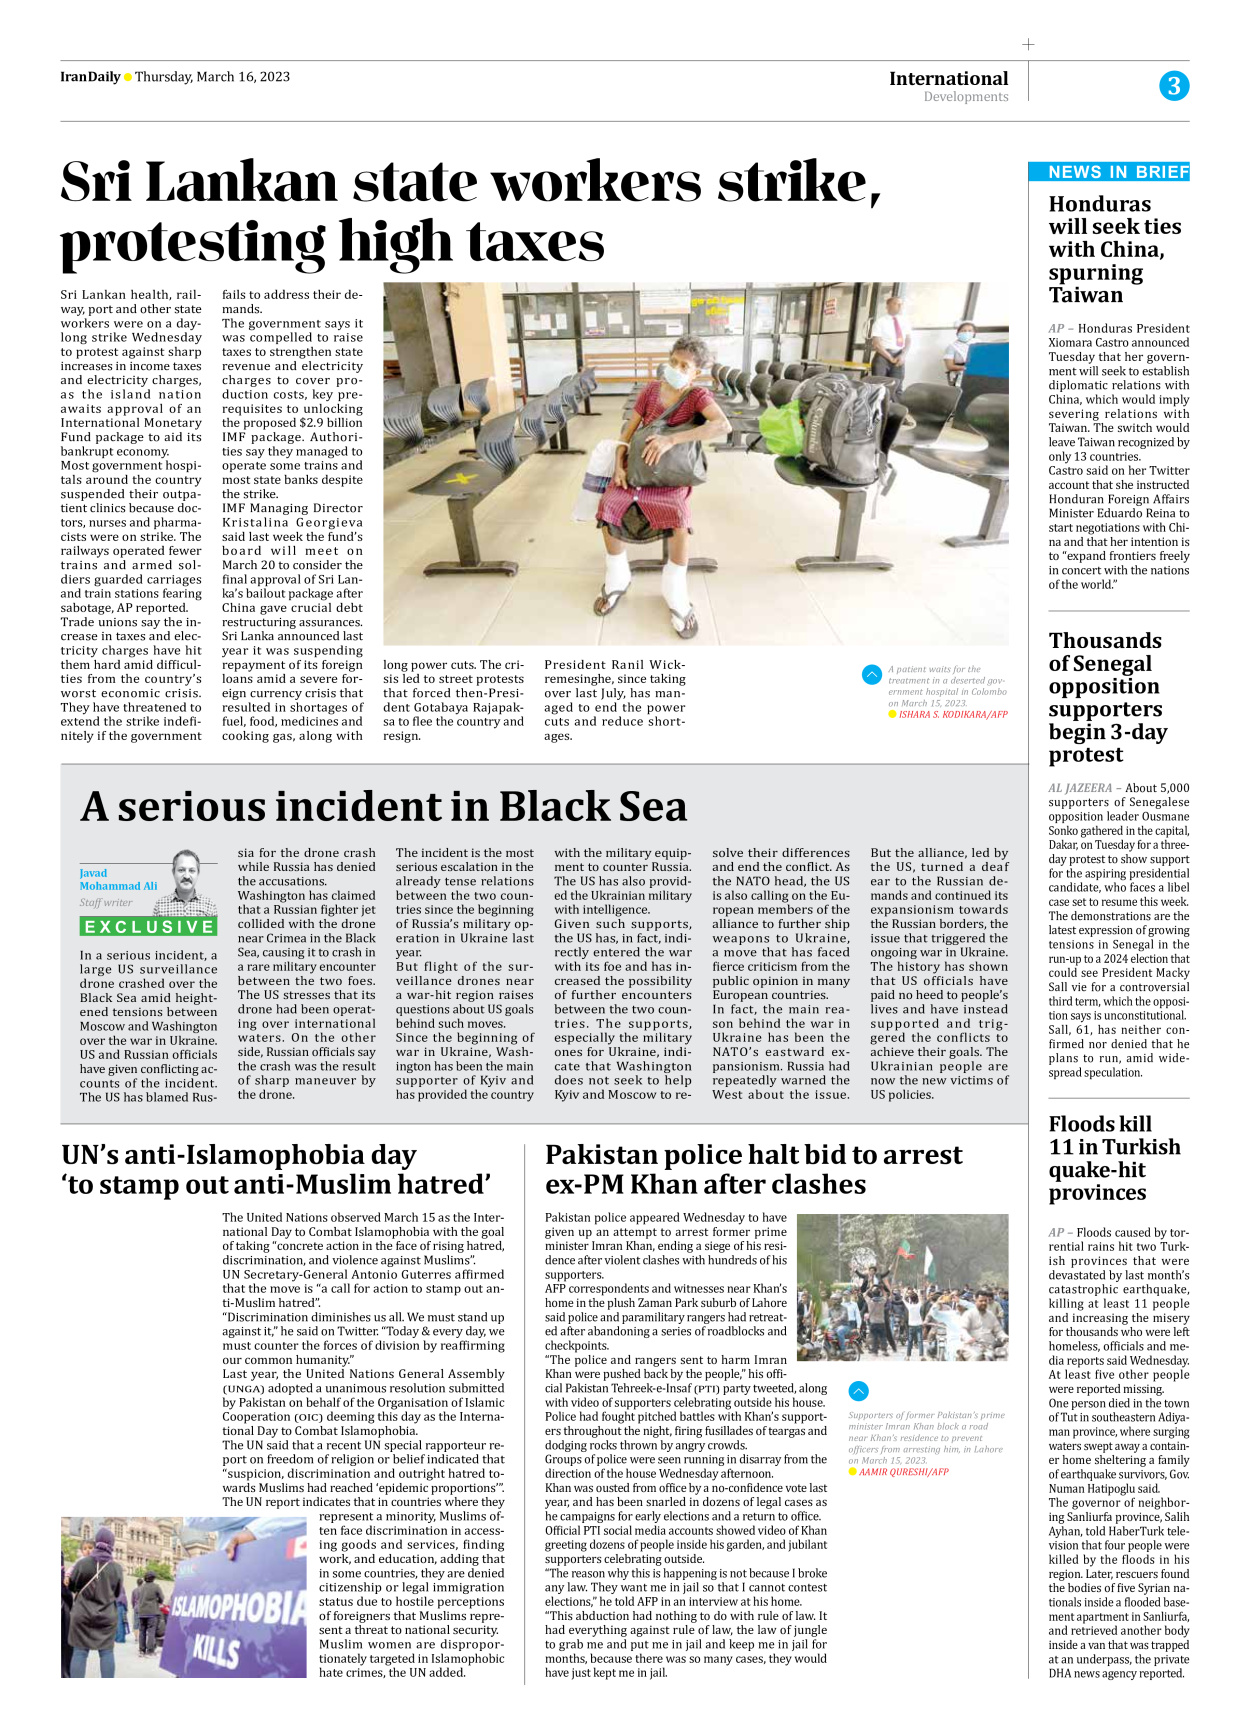 Iran Daily - Number Seven Thousand Two Hundred and Fifty Nine - 16 March 2023 - Page 3